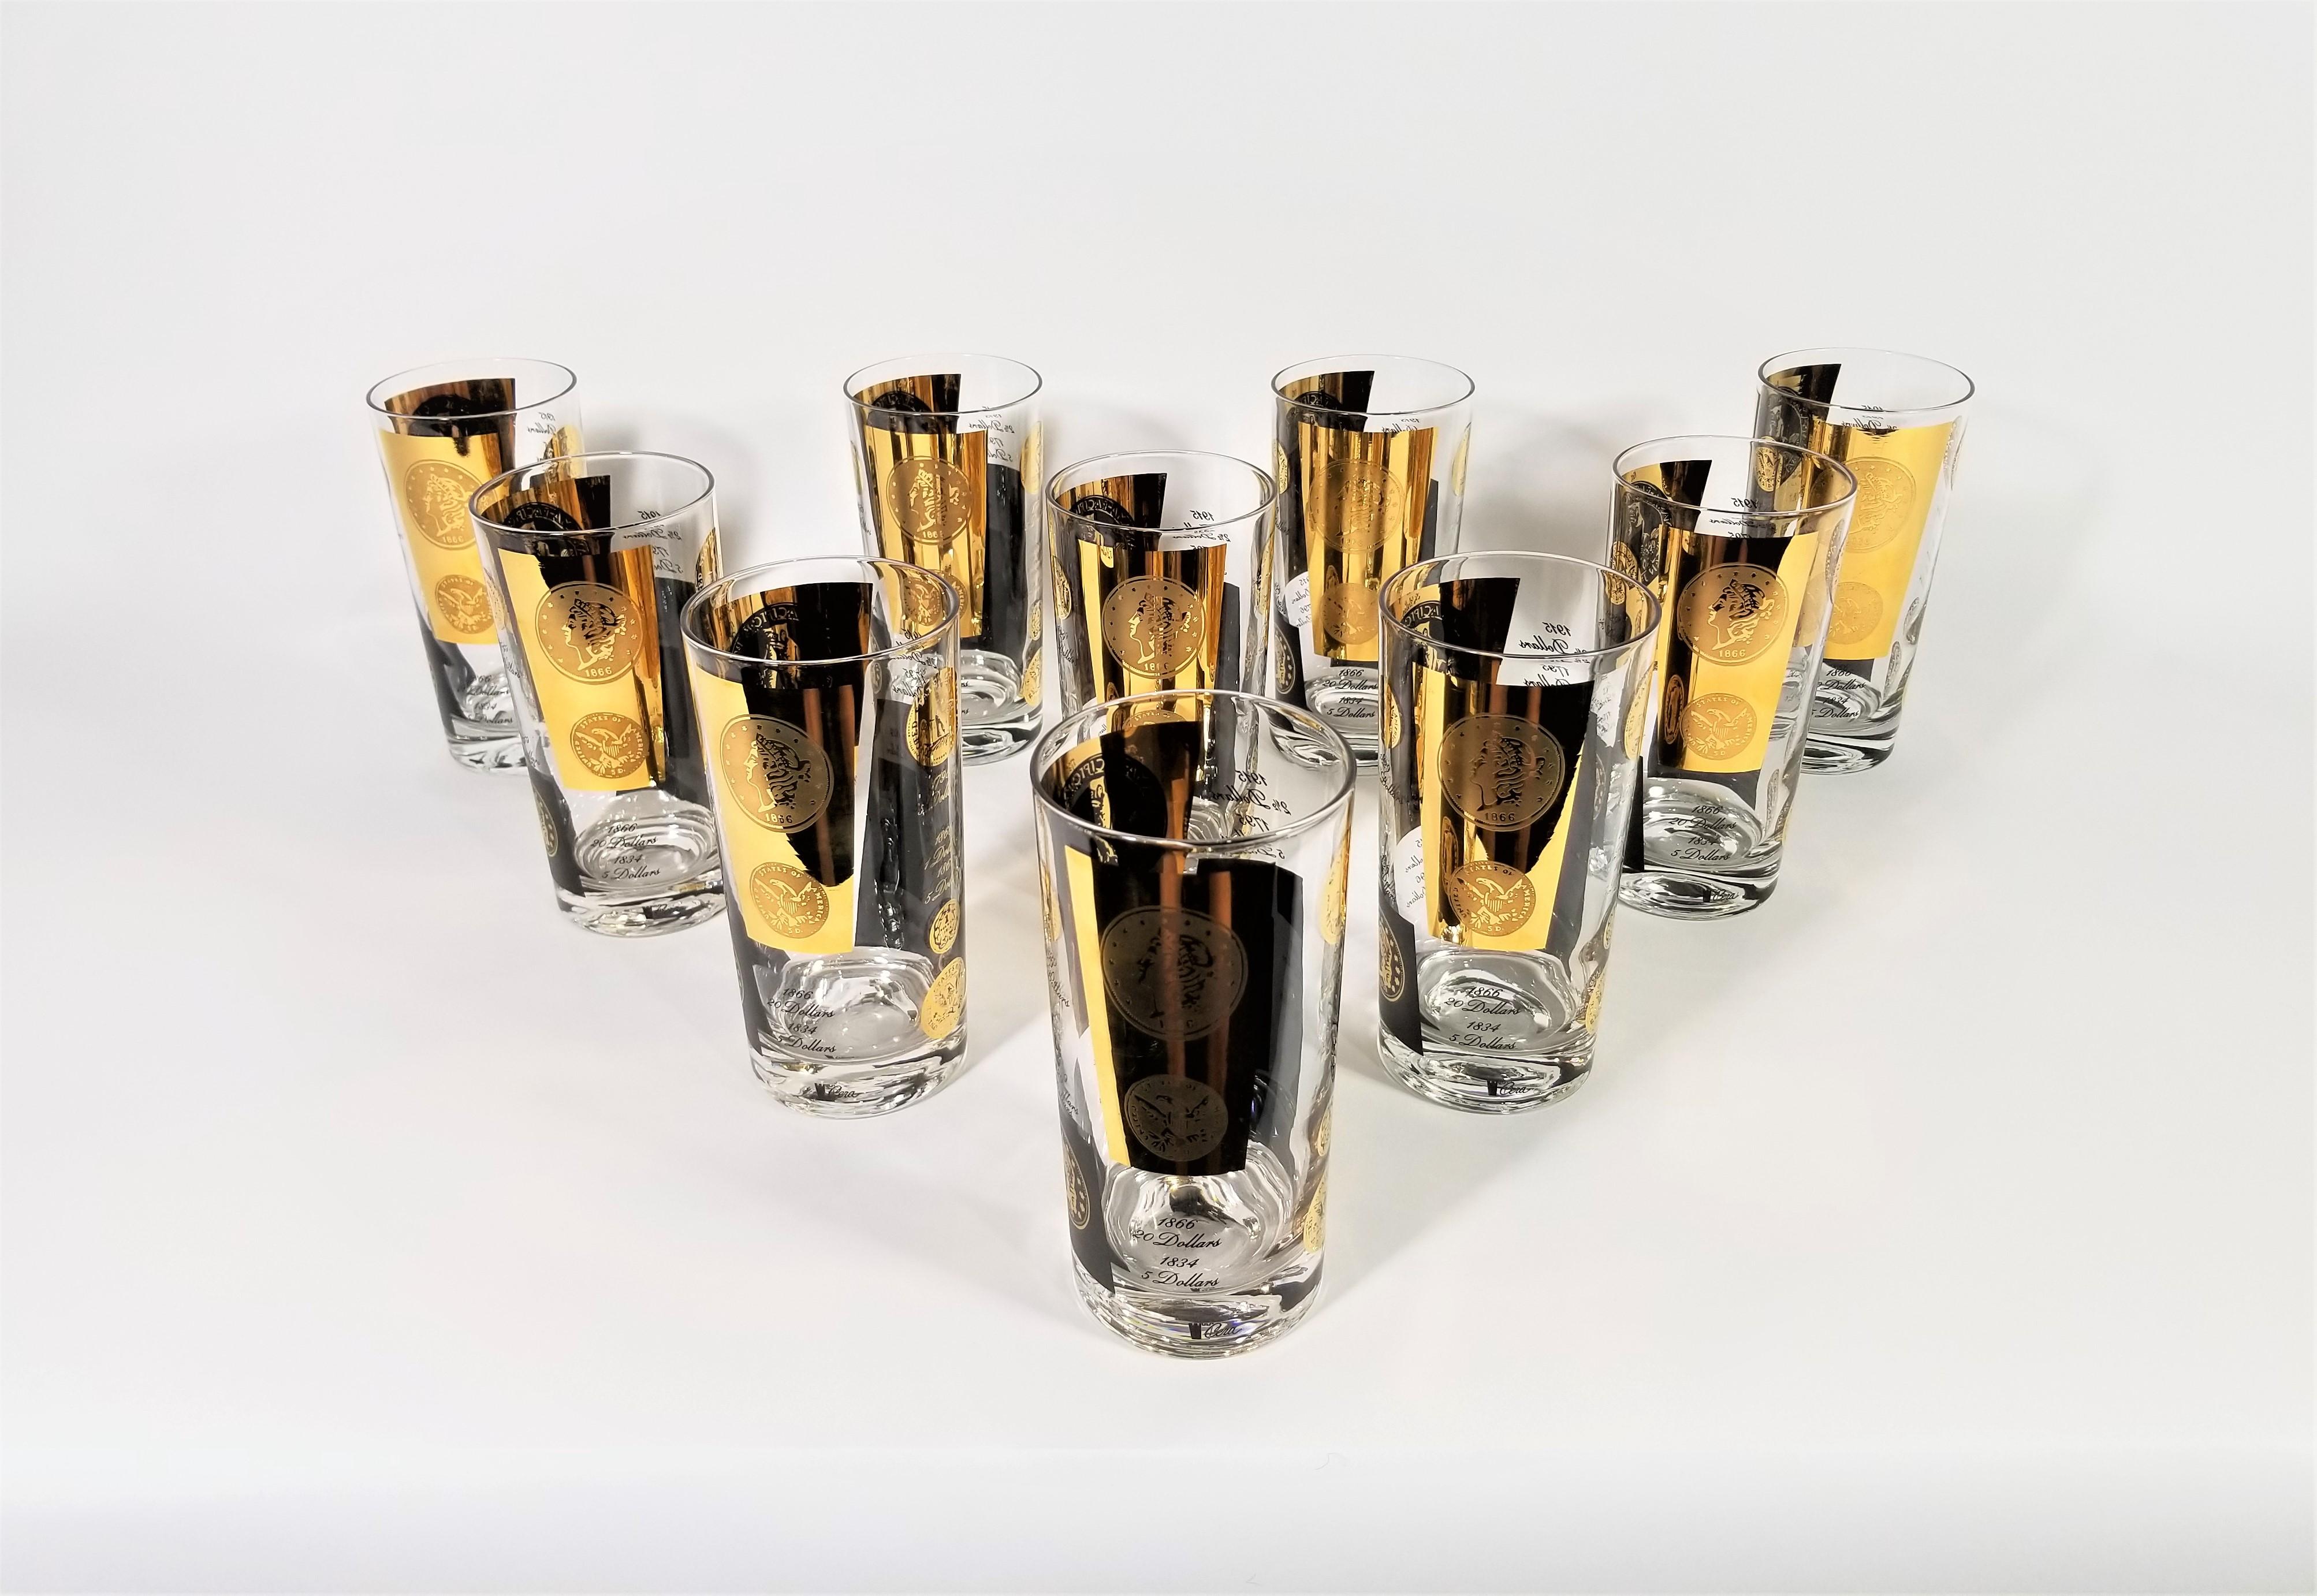 Cera 22-Karat Gold Signed Glassware Barware 1960s Midcentury Set of 10 In Excellent Condition For Sale In New York, NY